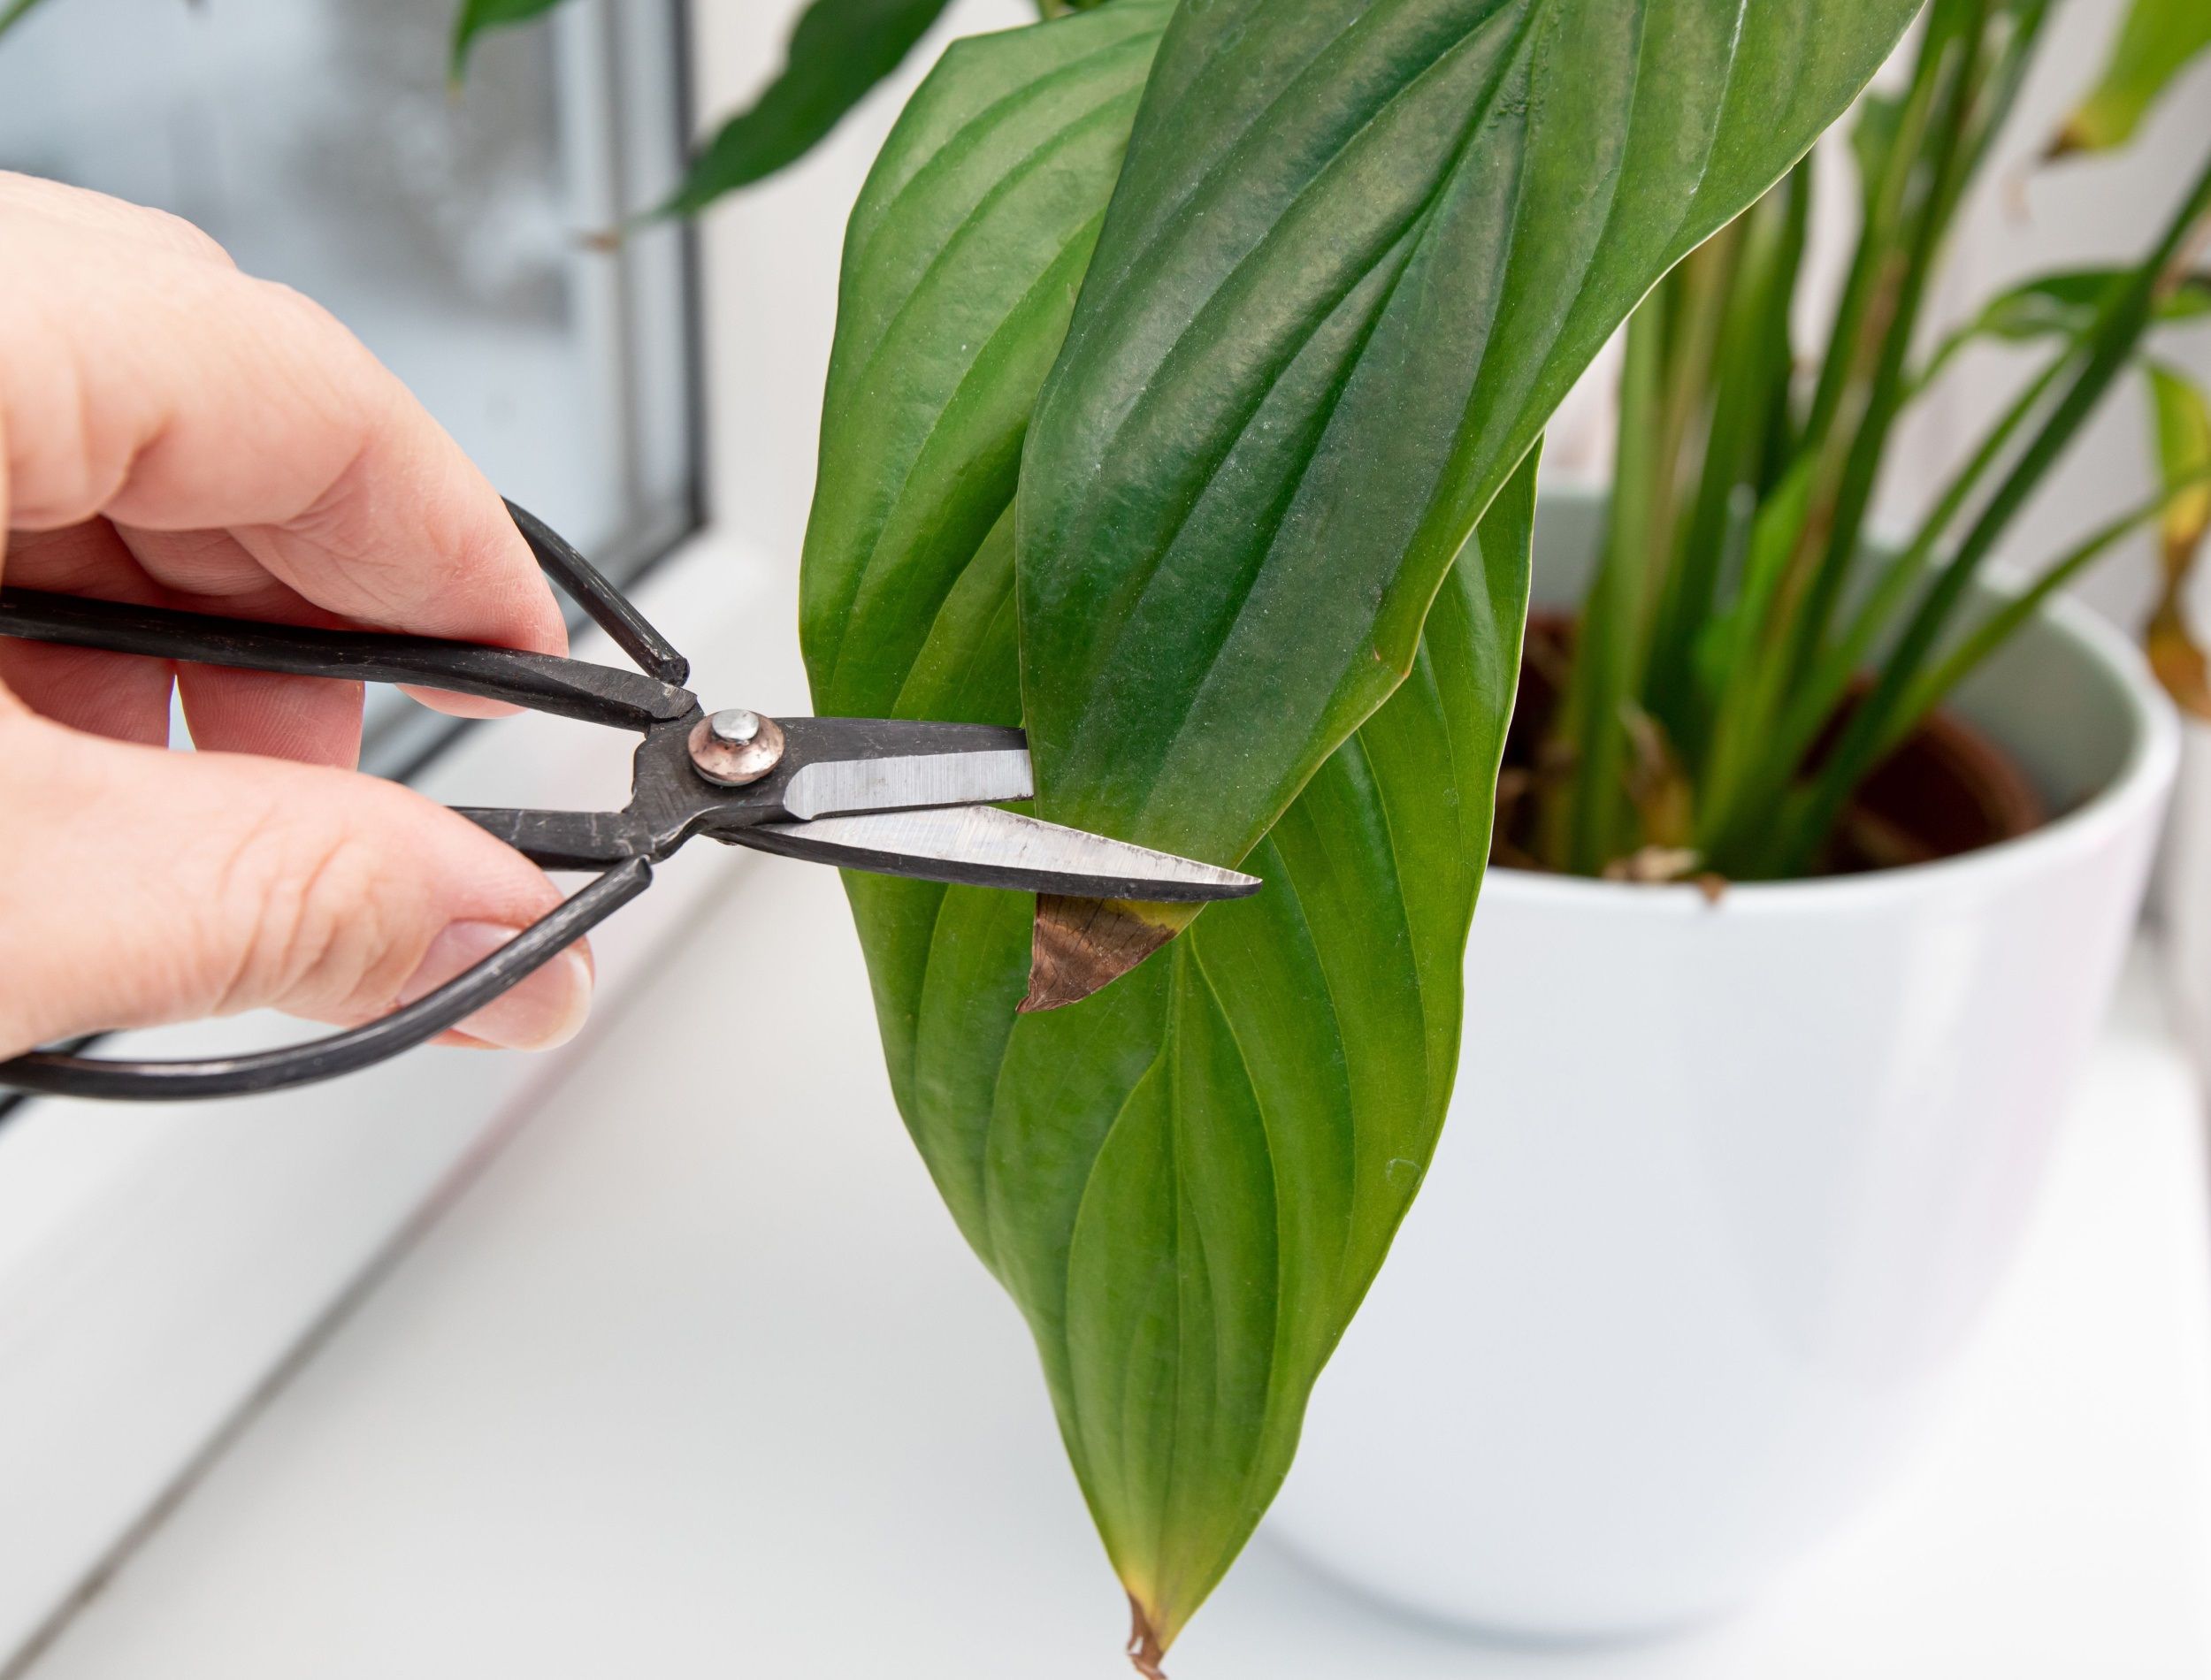 Person cut away houseplant Spathiphyllum commonly known as spath or peace lilies brown dead leaf tips. Leaf browning causes can be over watering, temperature extremes, lack of watering.